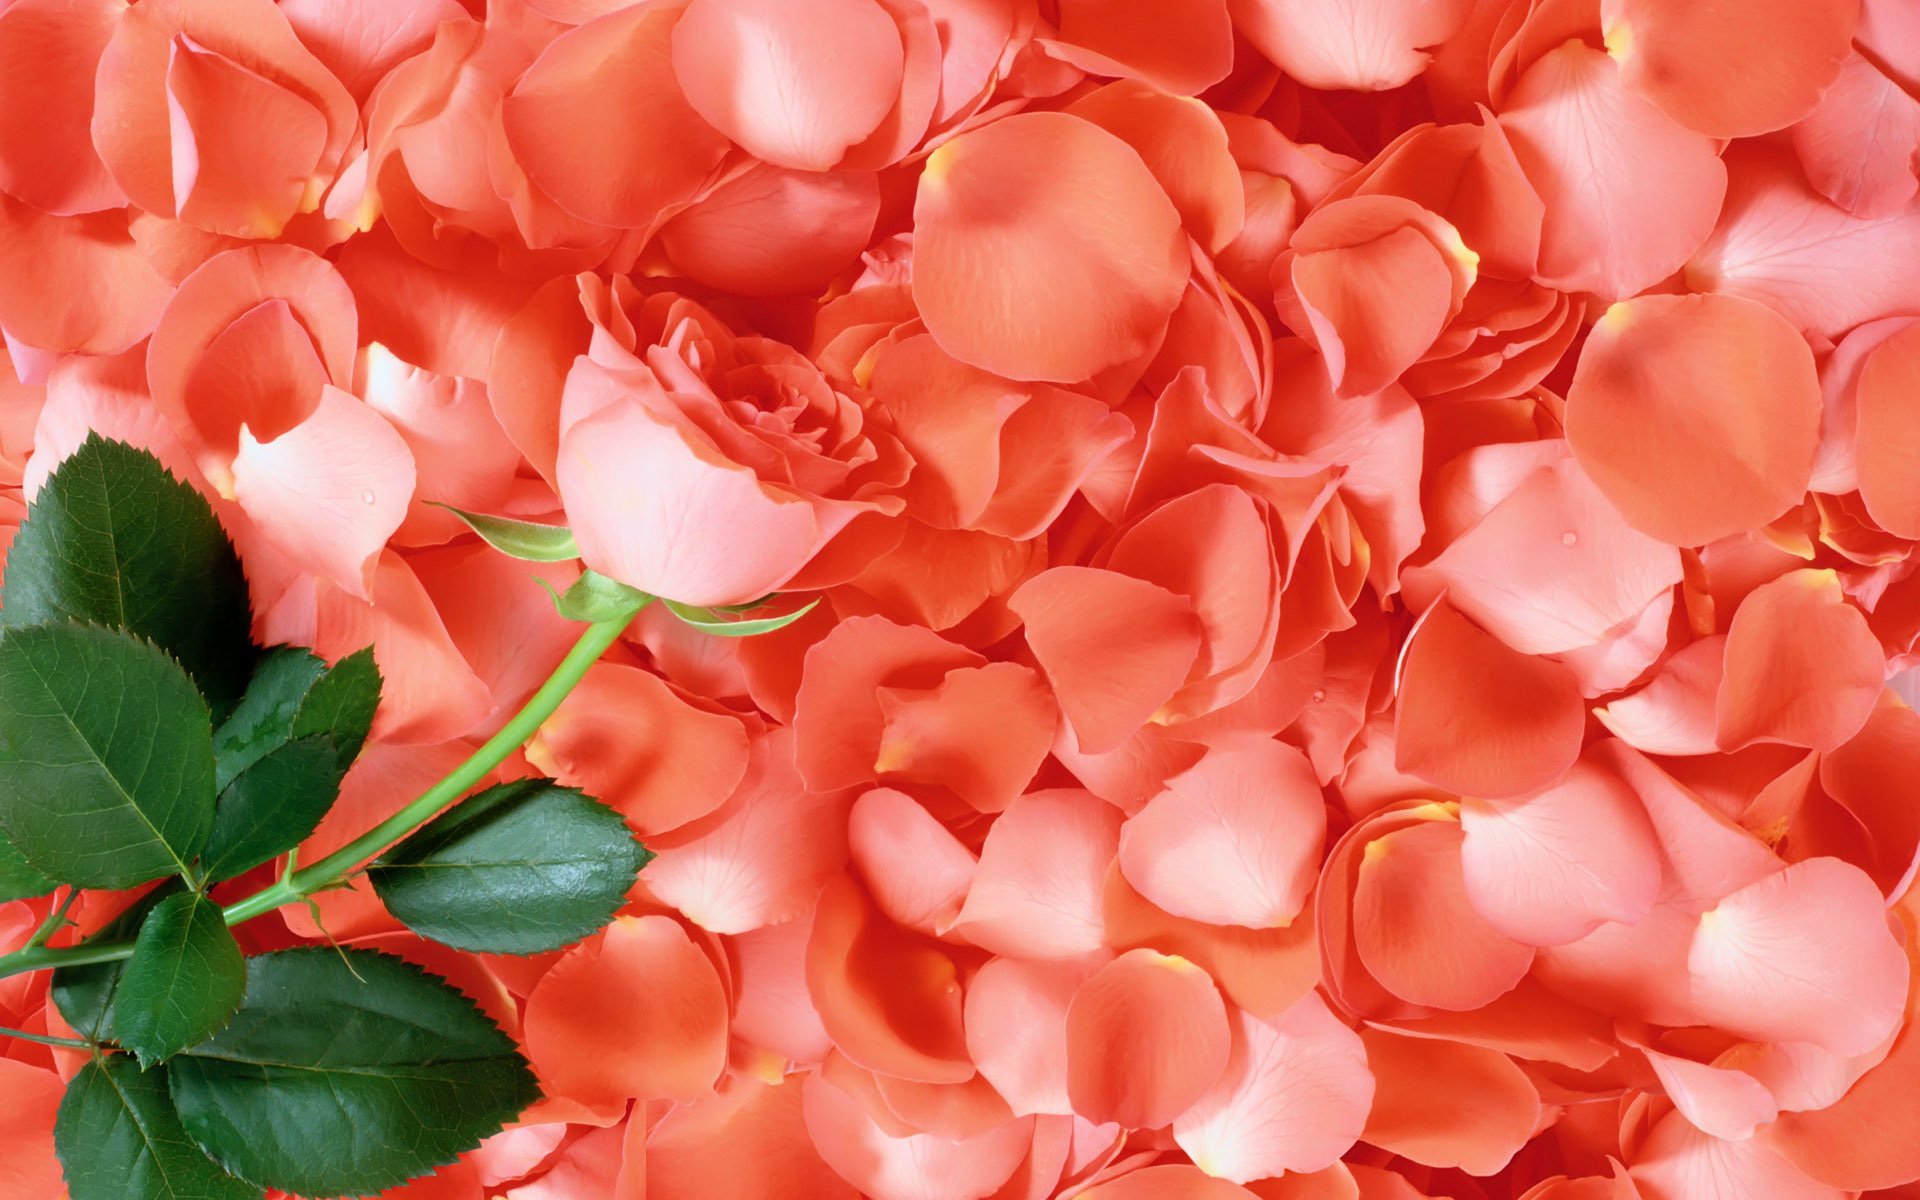 Rose Petals Background Hd - The Home 3D Plan